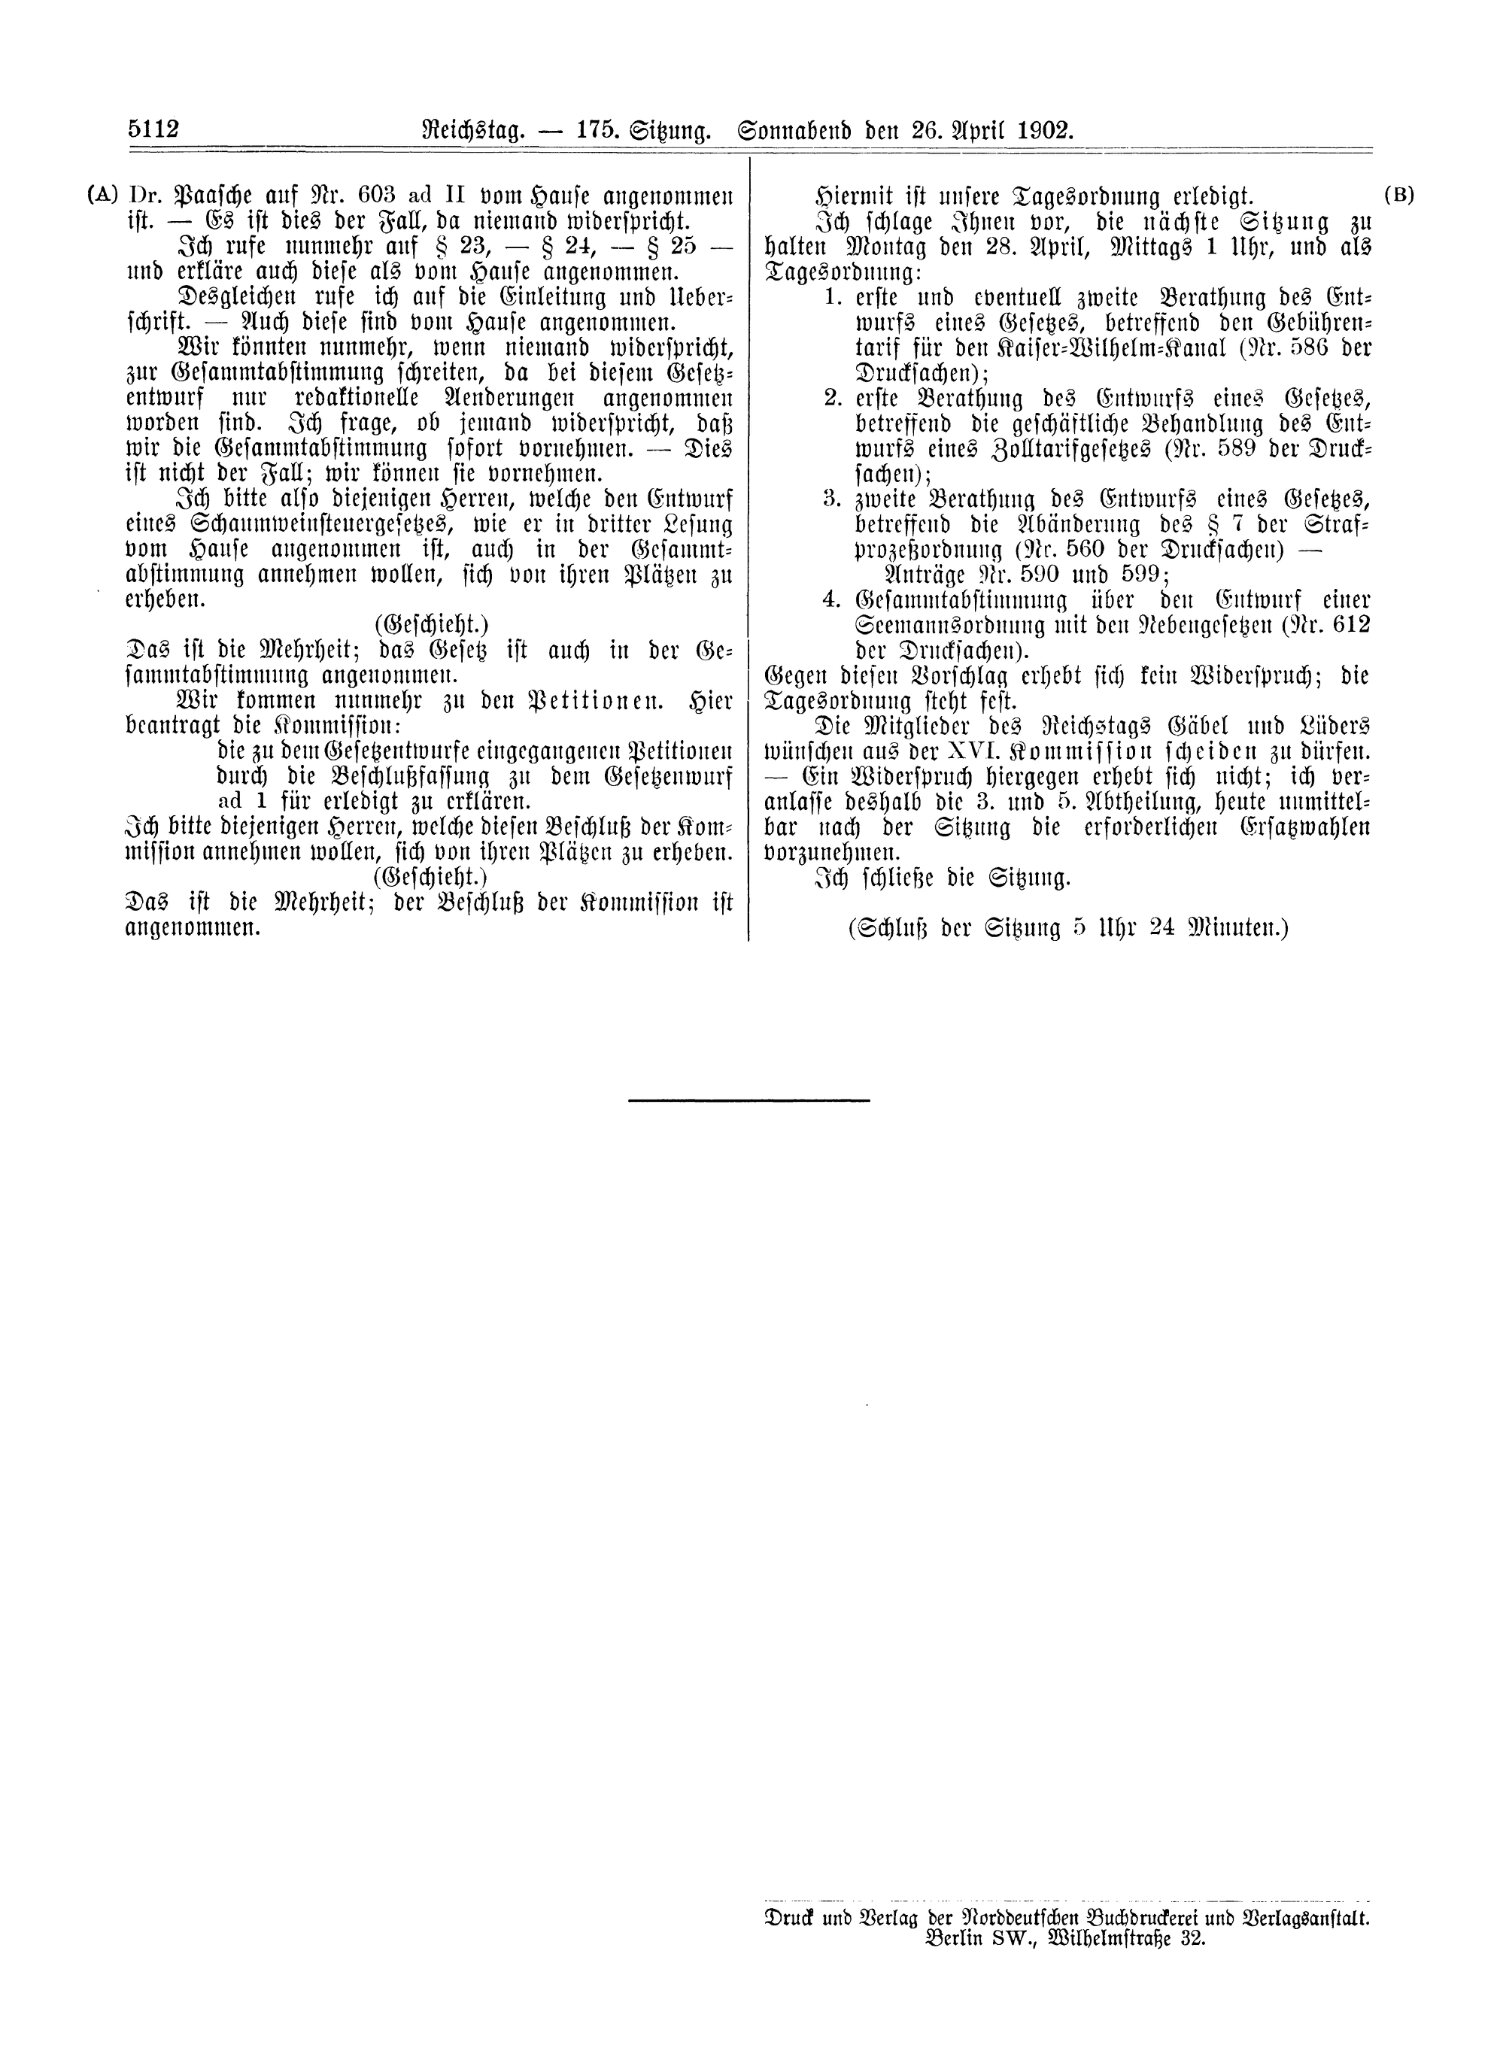 Scan of page 5112